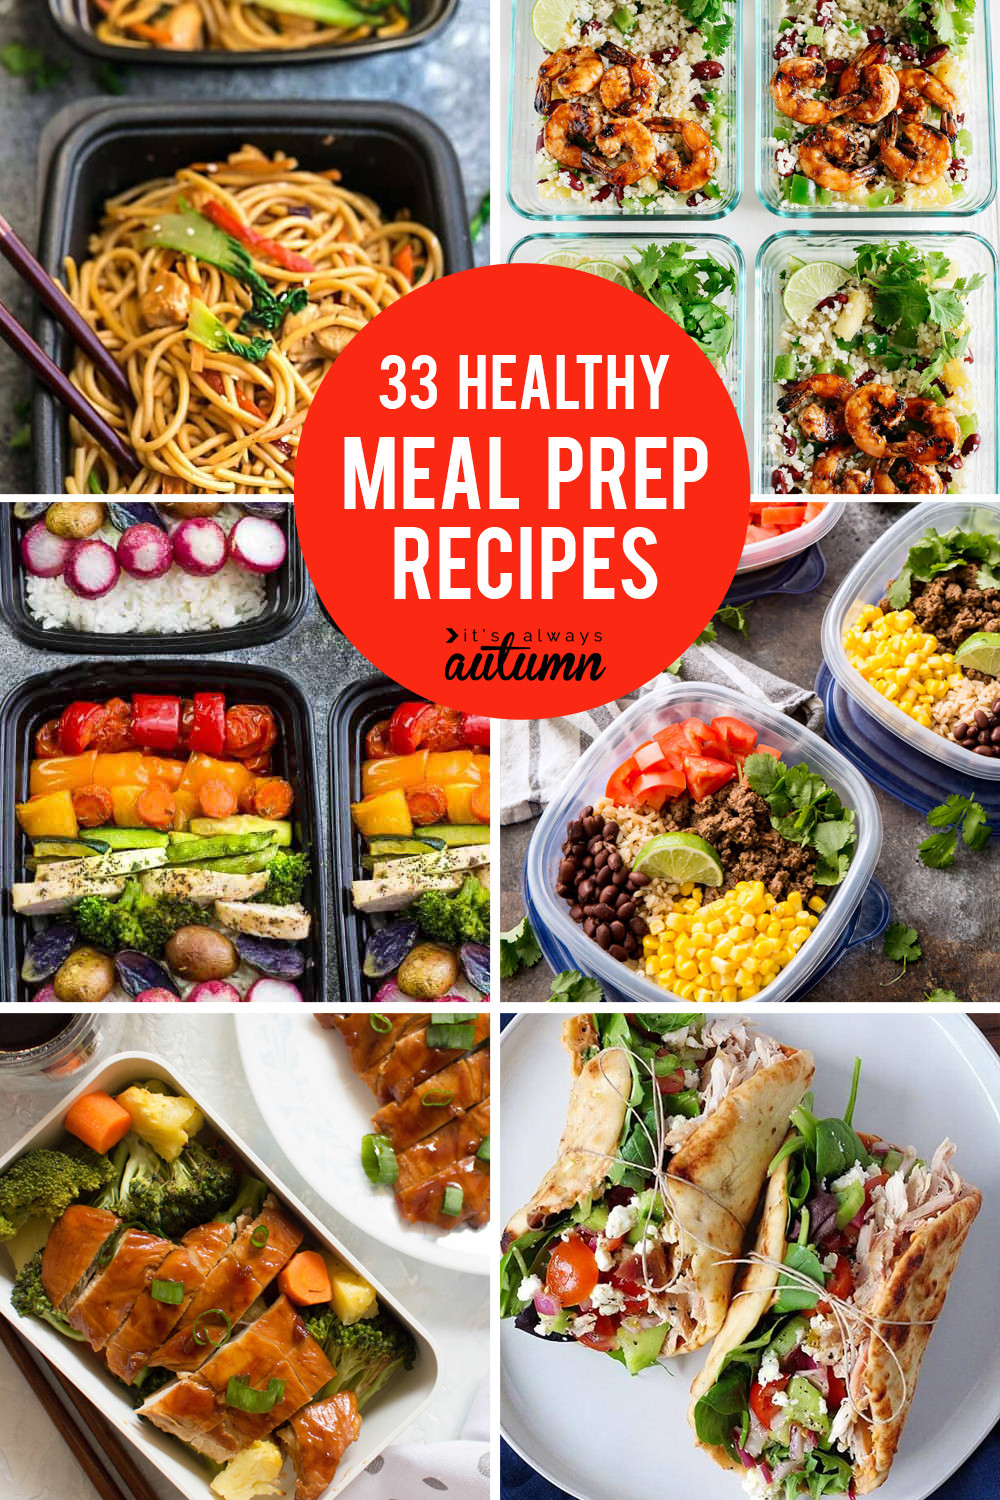 Healthy Lunches To Make
 33 delicious meal prep recipes for healthy lunches that